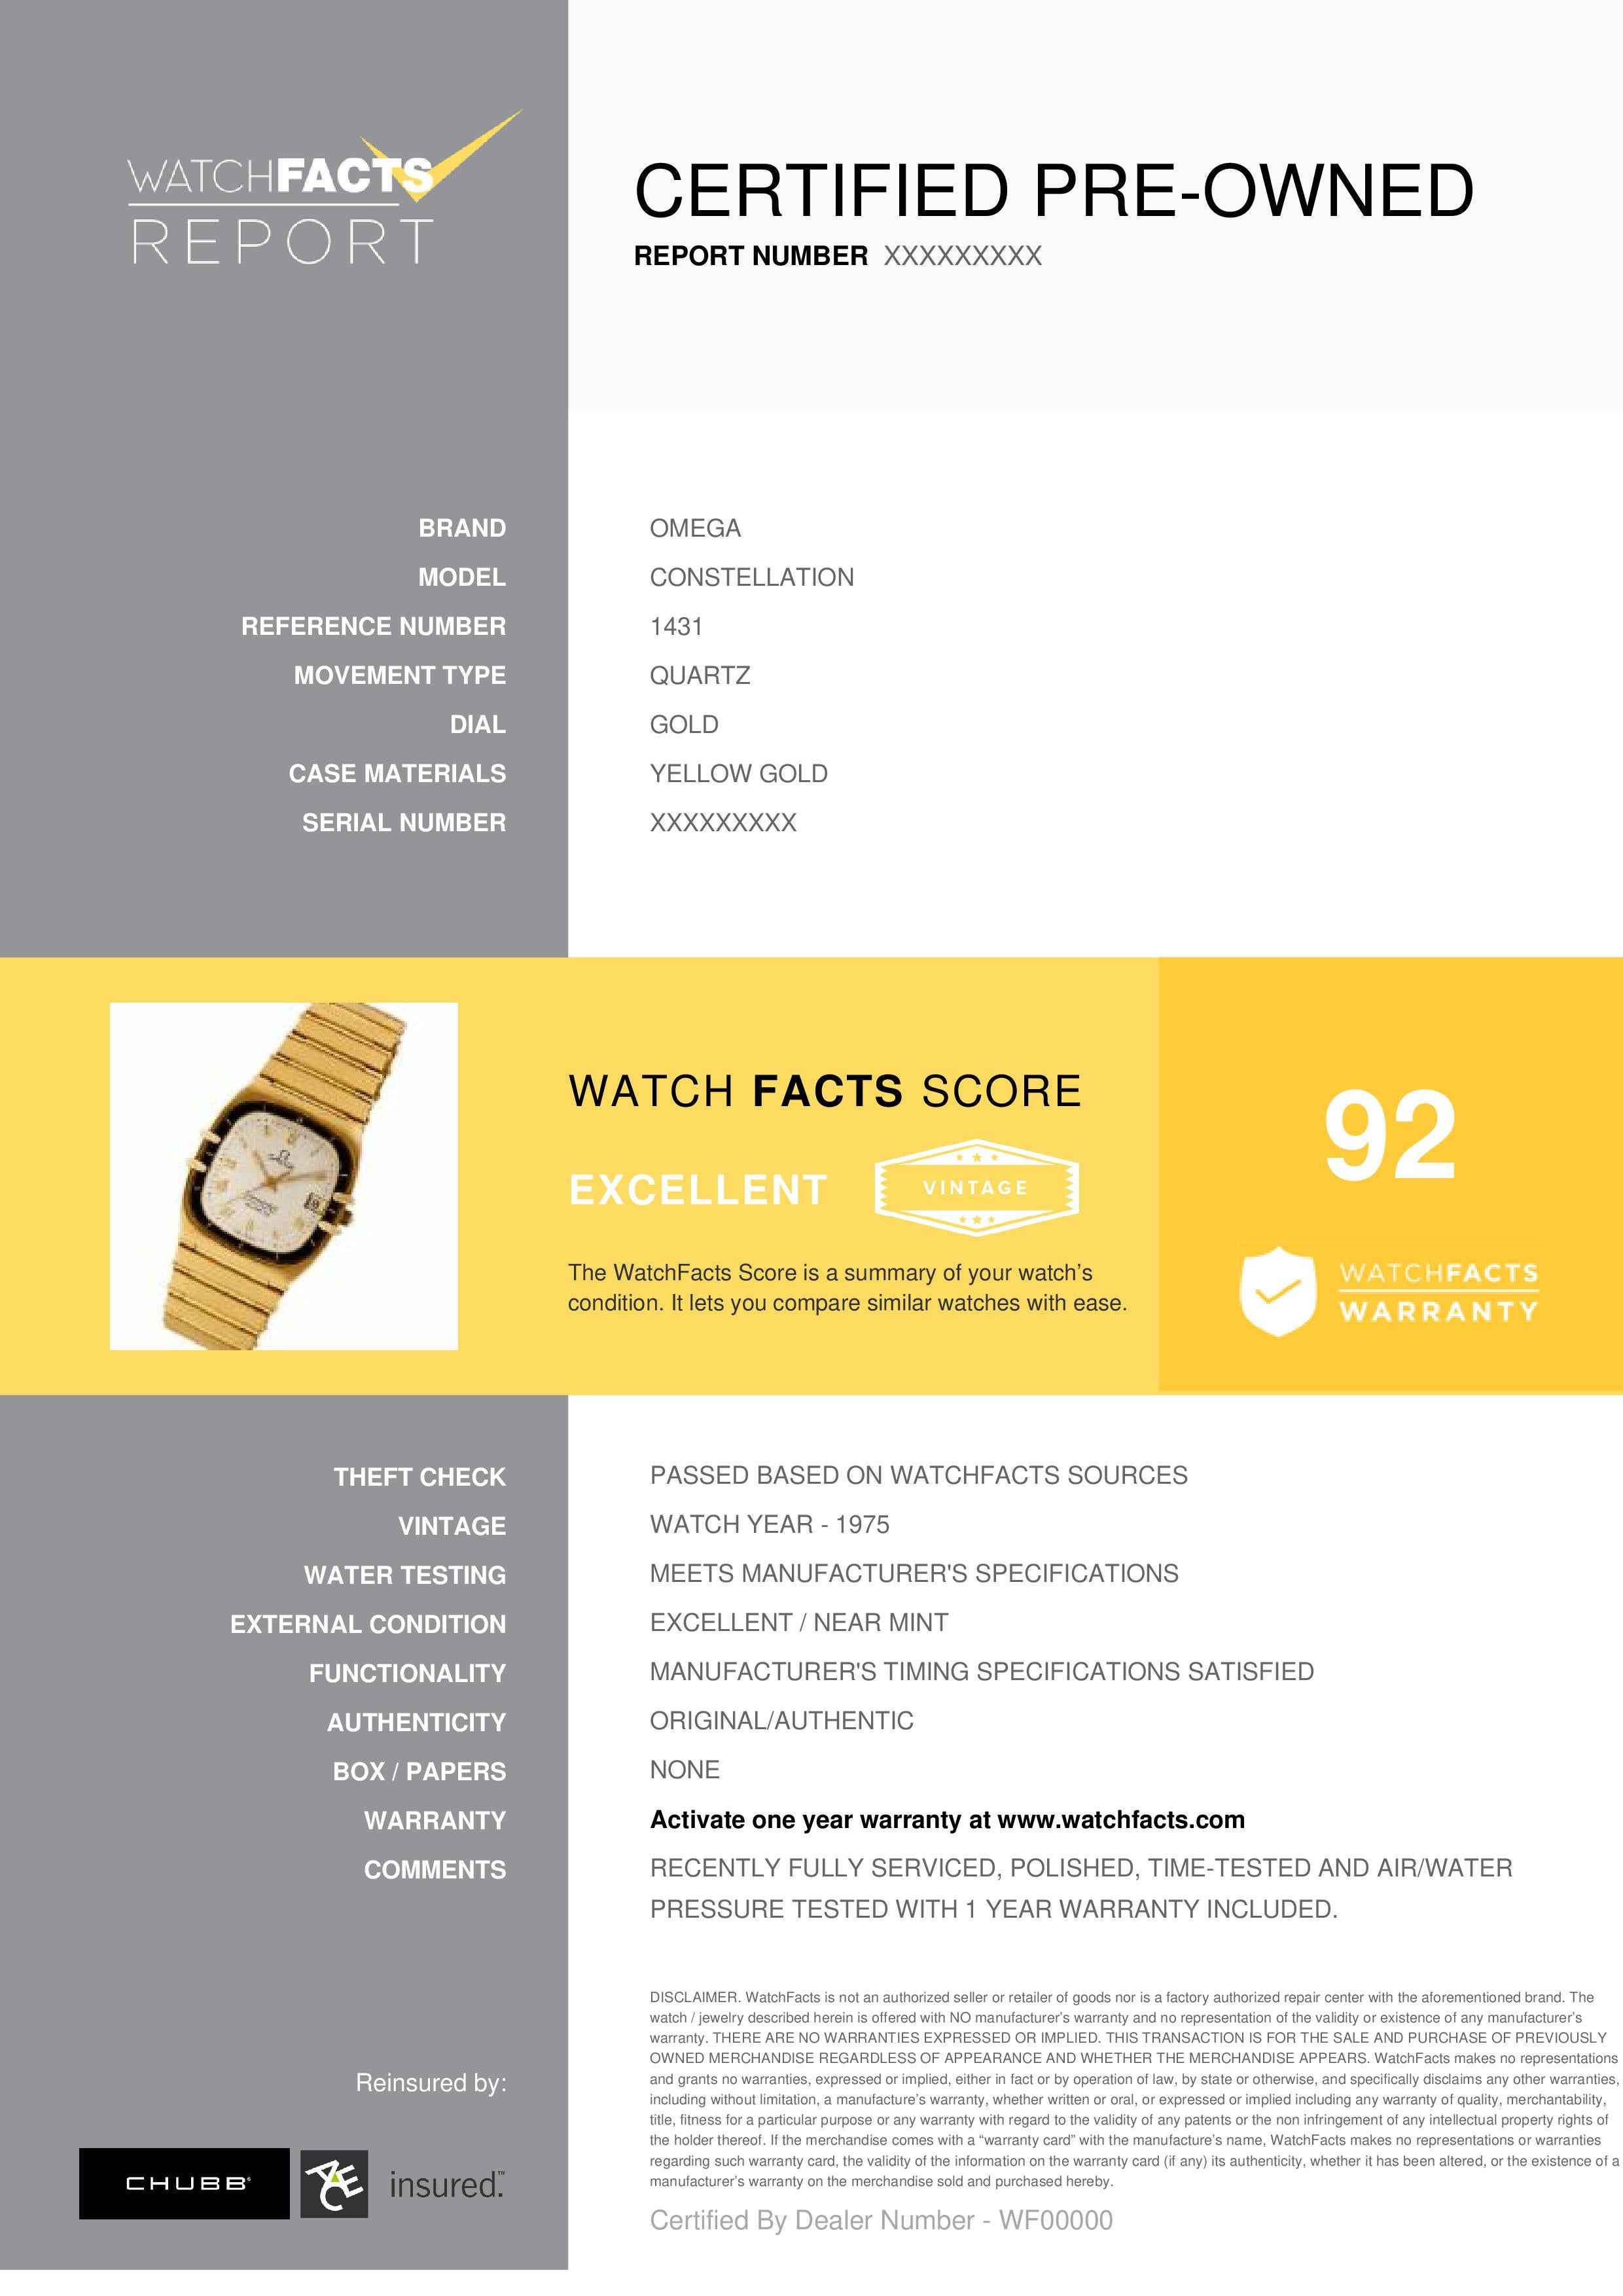 Omega Constellation Reference #: 1431. Mens Quartz Watch Yellow Gold Gold 0 MM. Verified and Certified by WatchFacts. 1 year warranty offered by WatchFacts.
